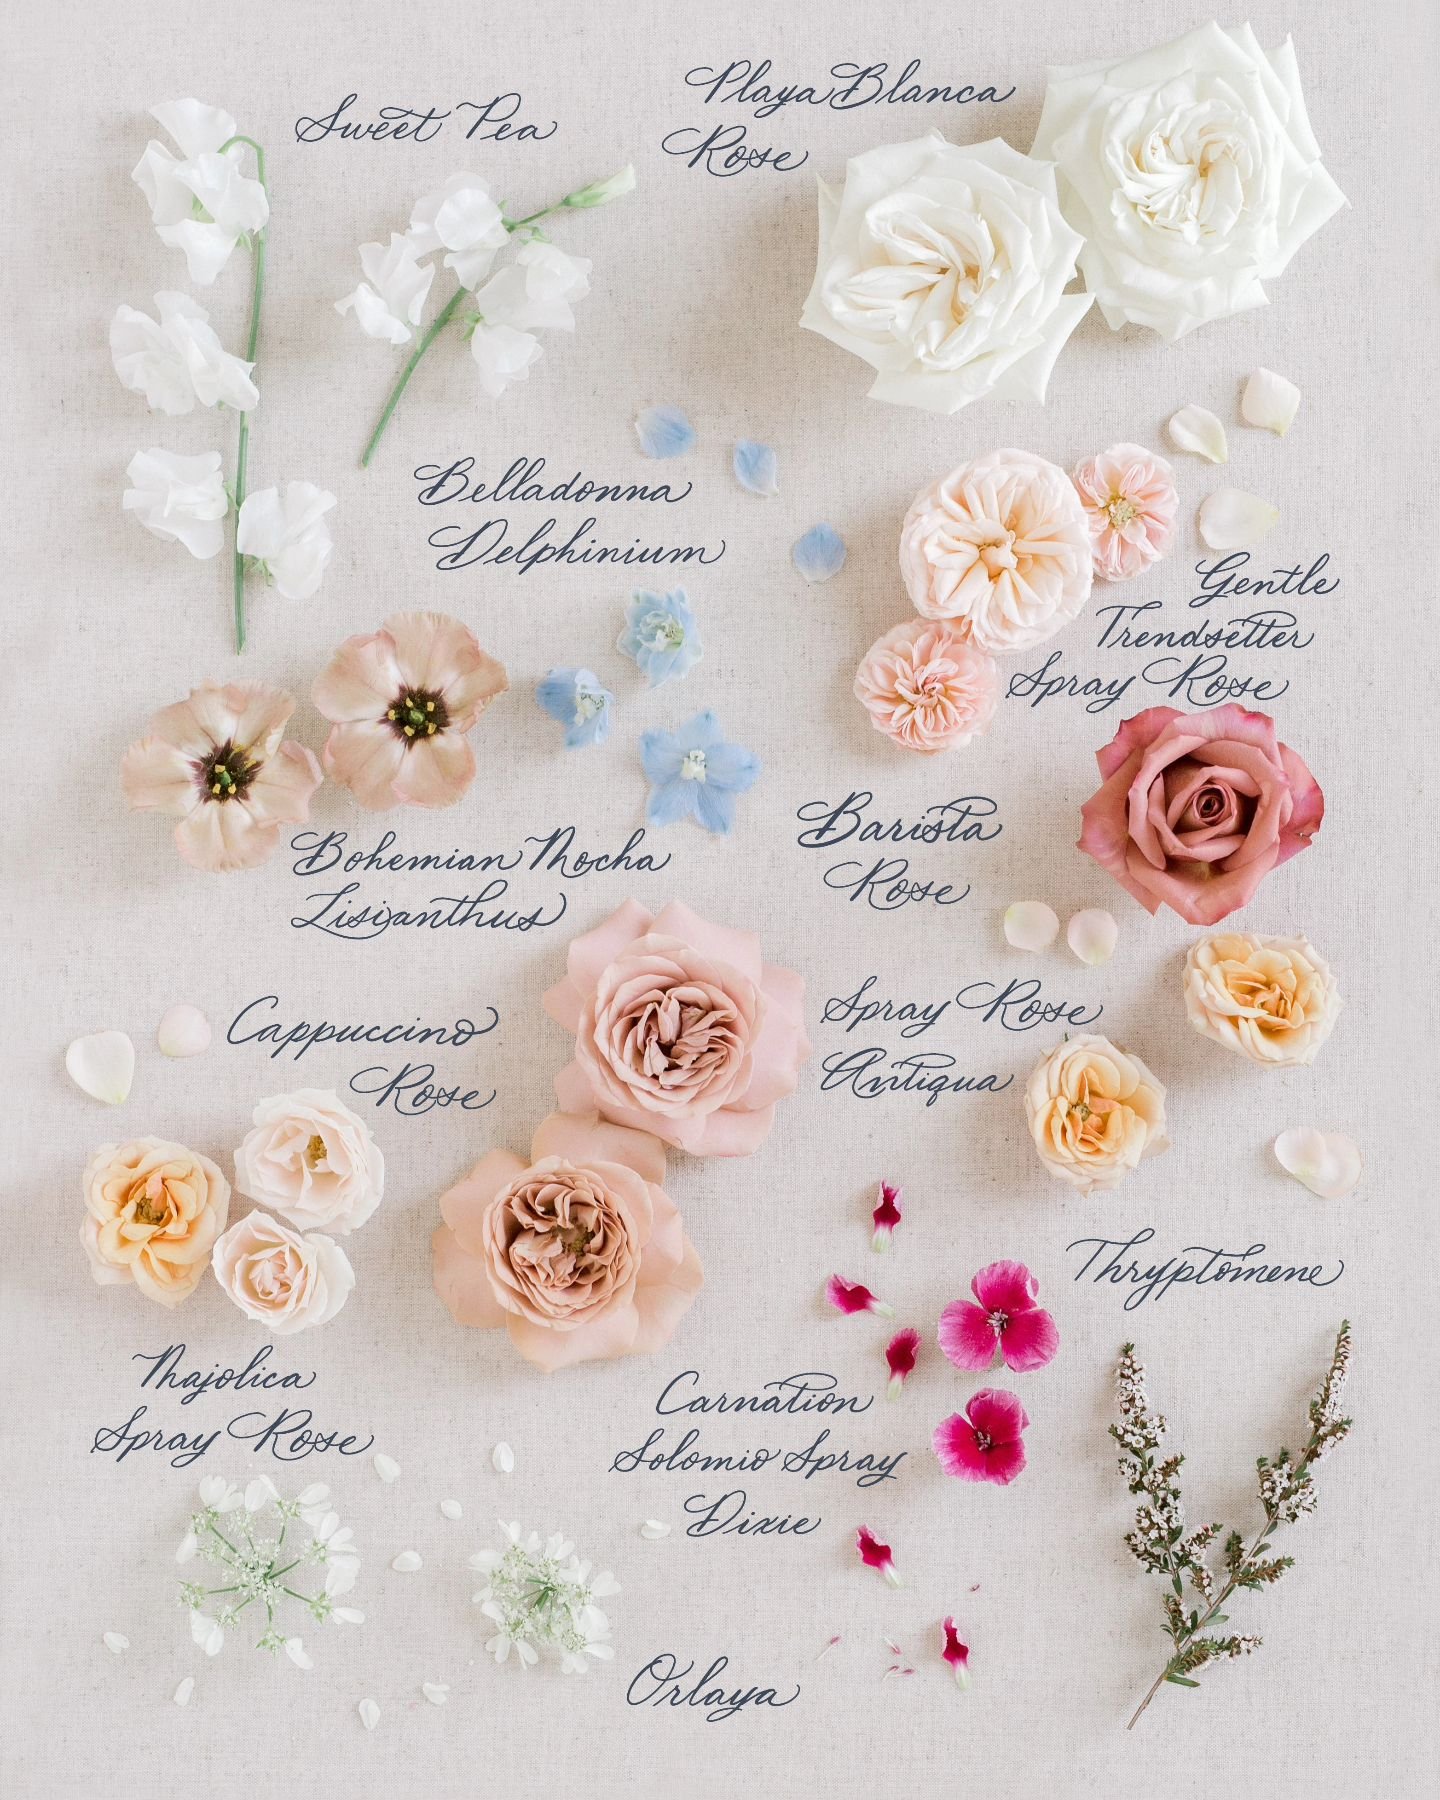 A bouquet preservation flat lay with @fallforflorals exclusively. A collaboration between the 3 of us where we  deconstruct and artfully arrange a bouquet into a few different flat lays, including a recipe of the flowers.

#yyccalligrapher #calgaryca